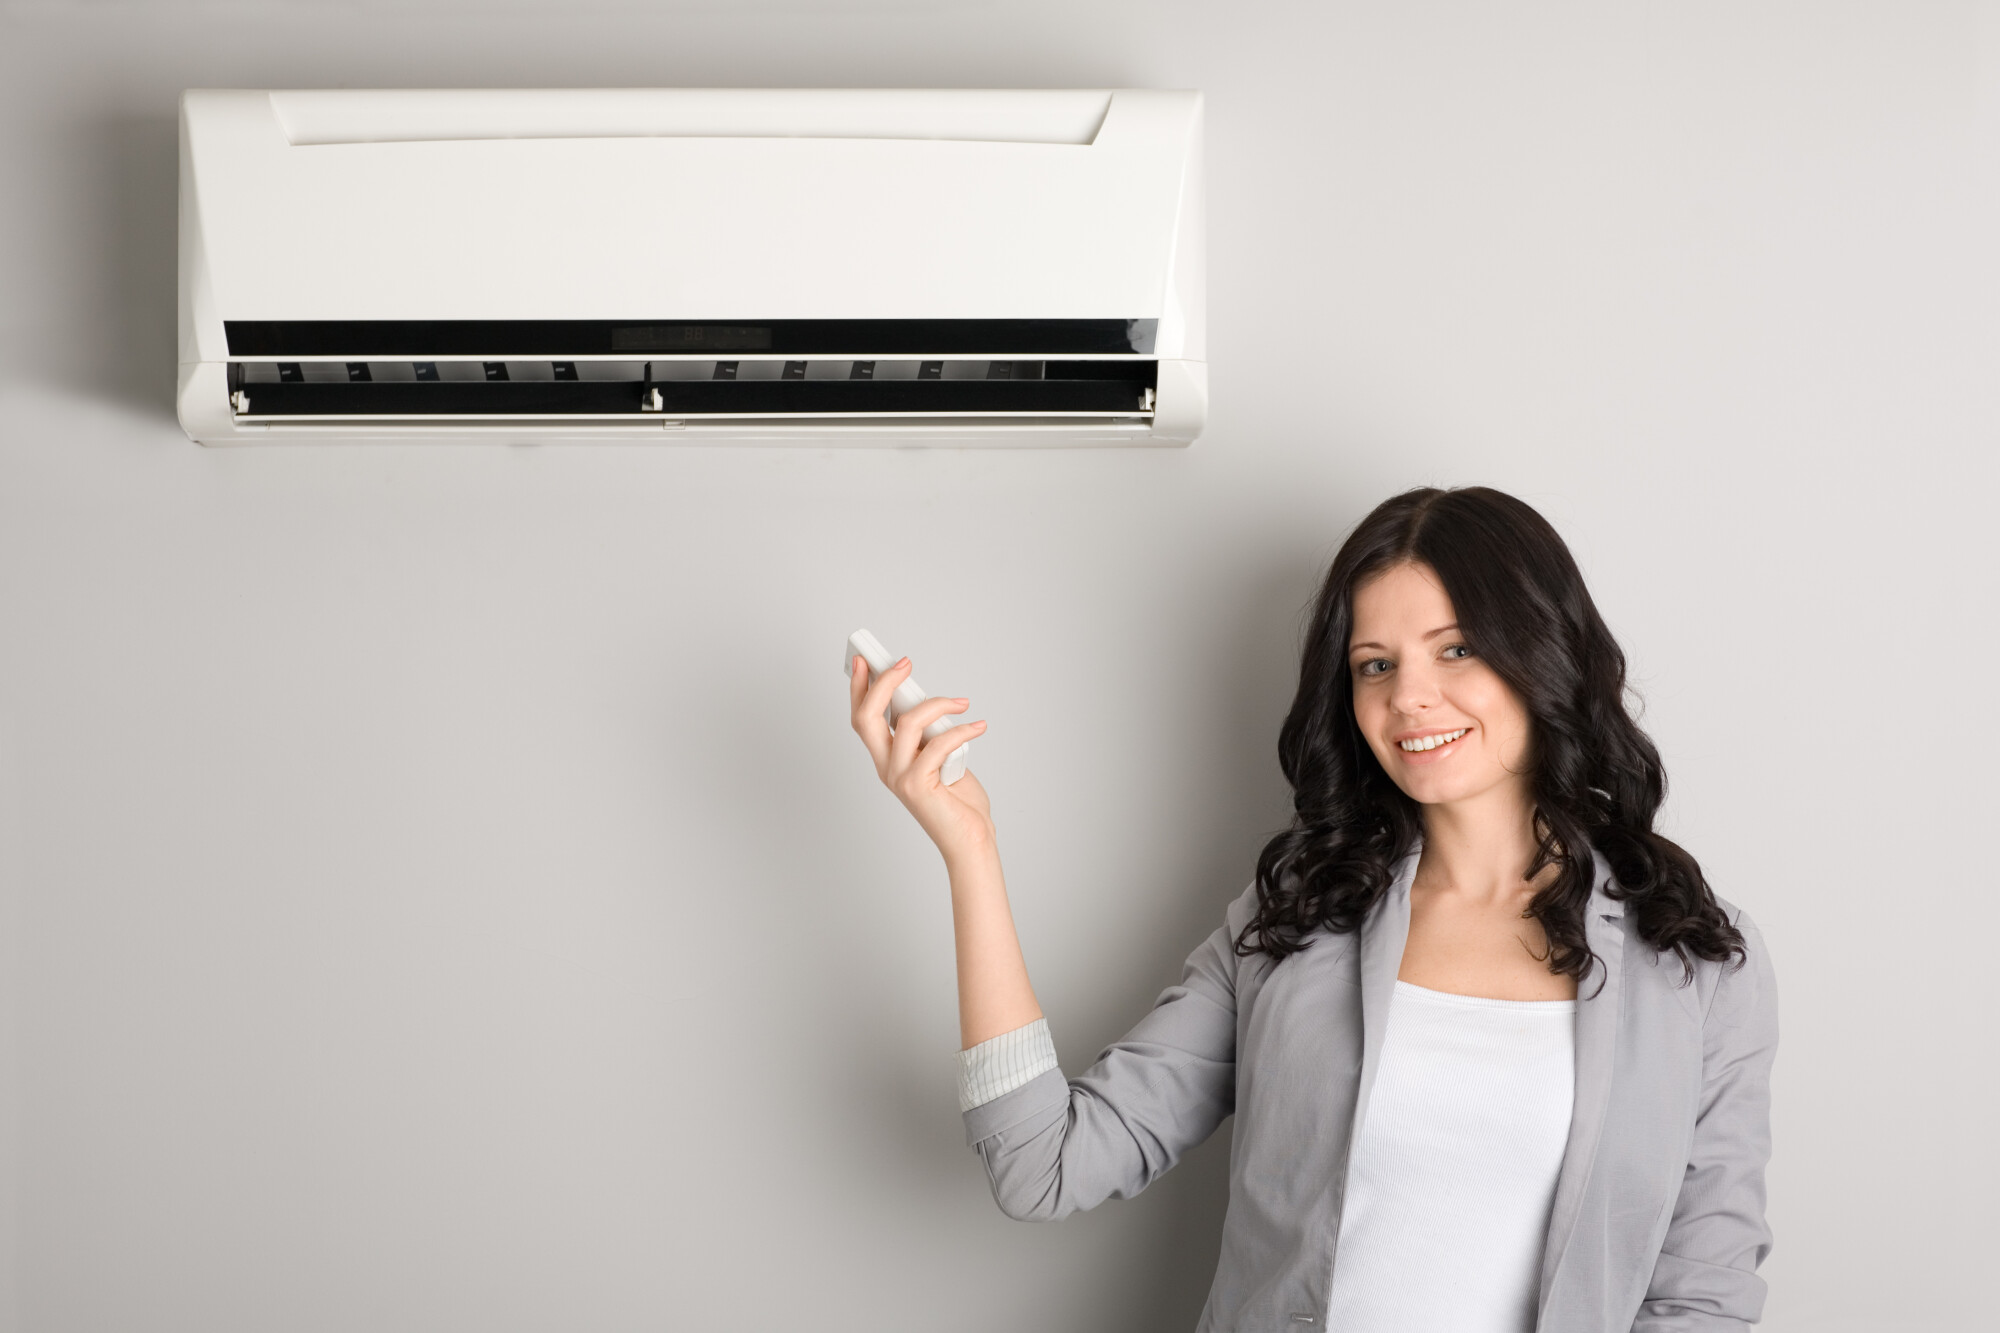 4 Benefits of HVAC Systems Beyond Temperature Control